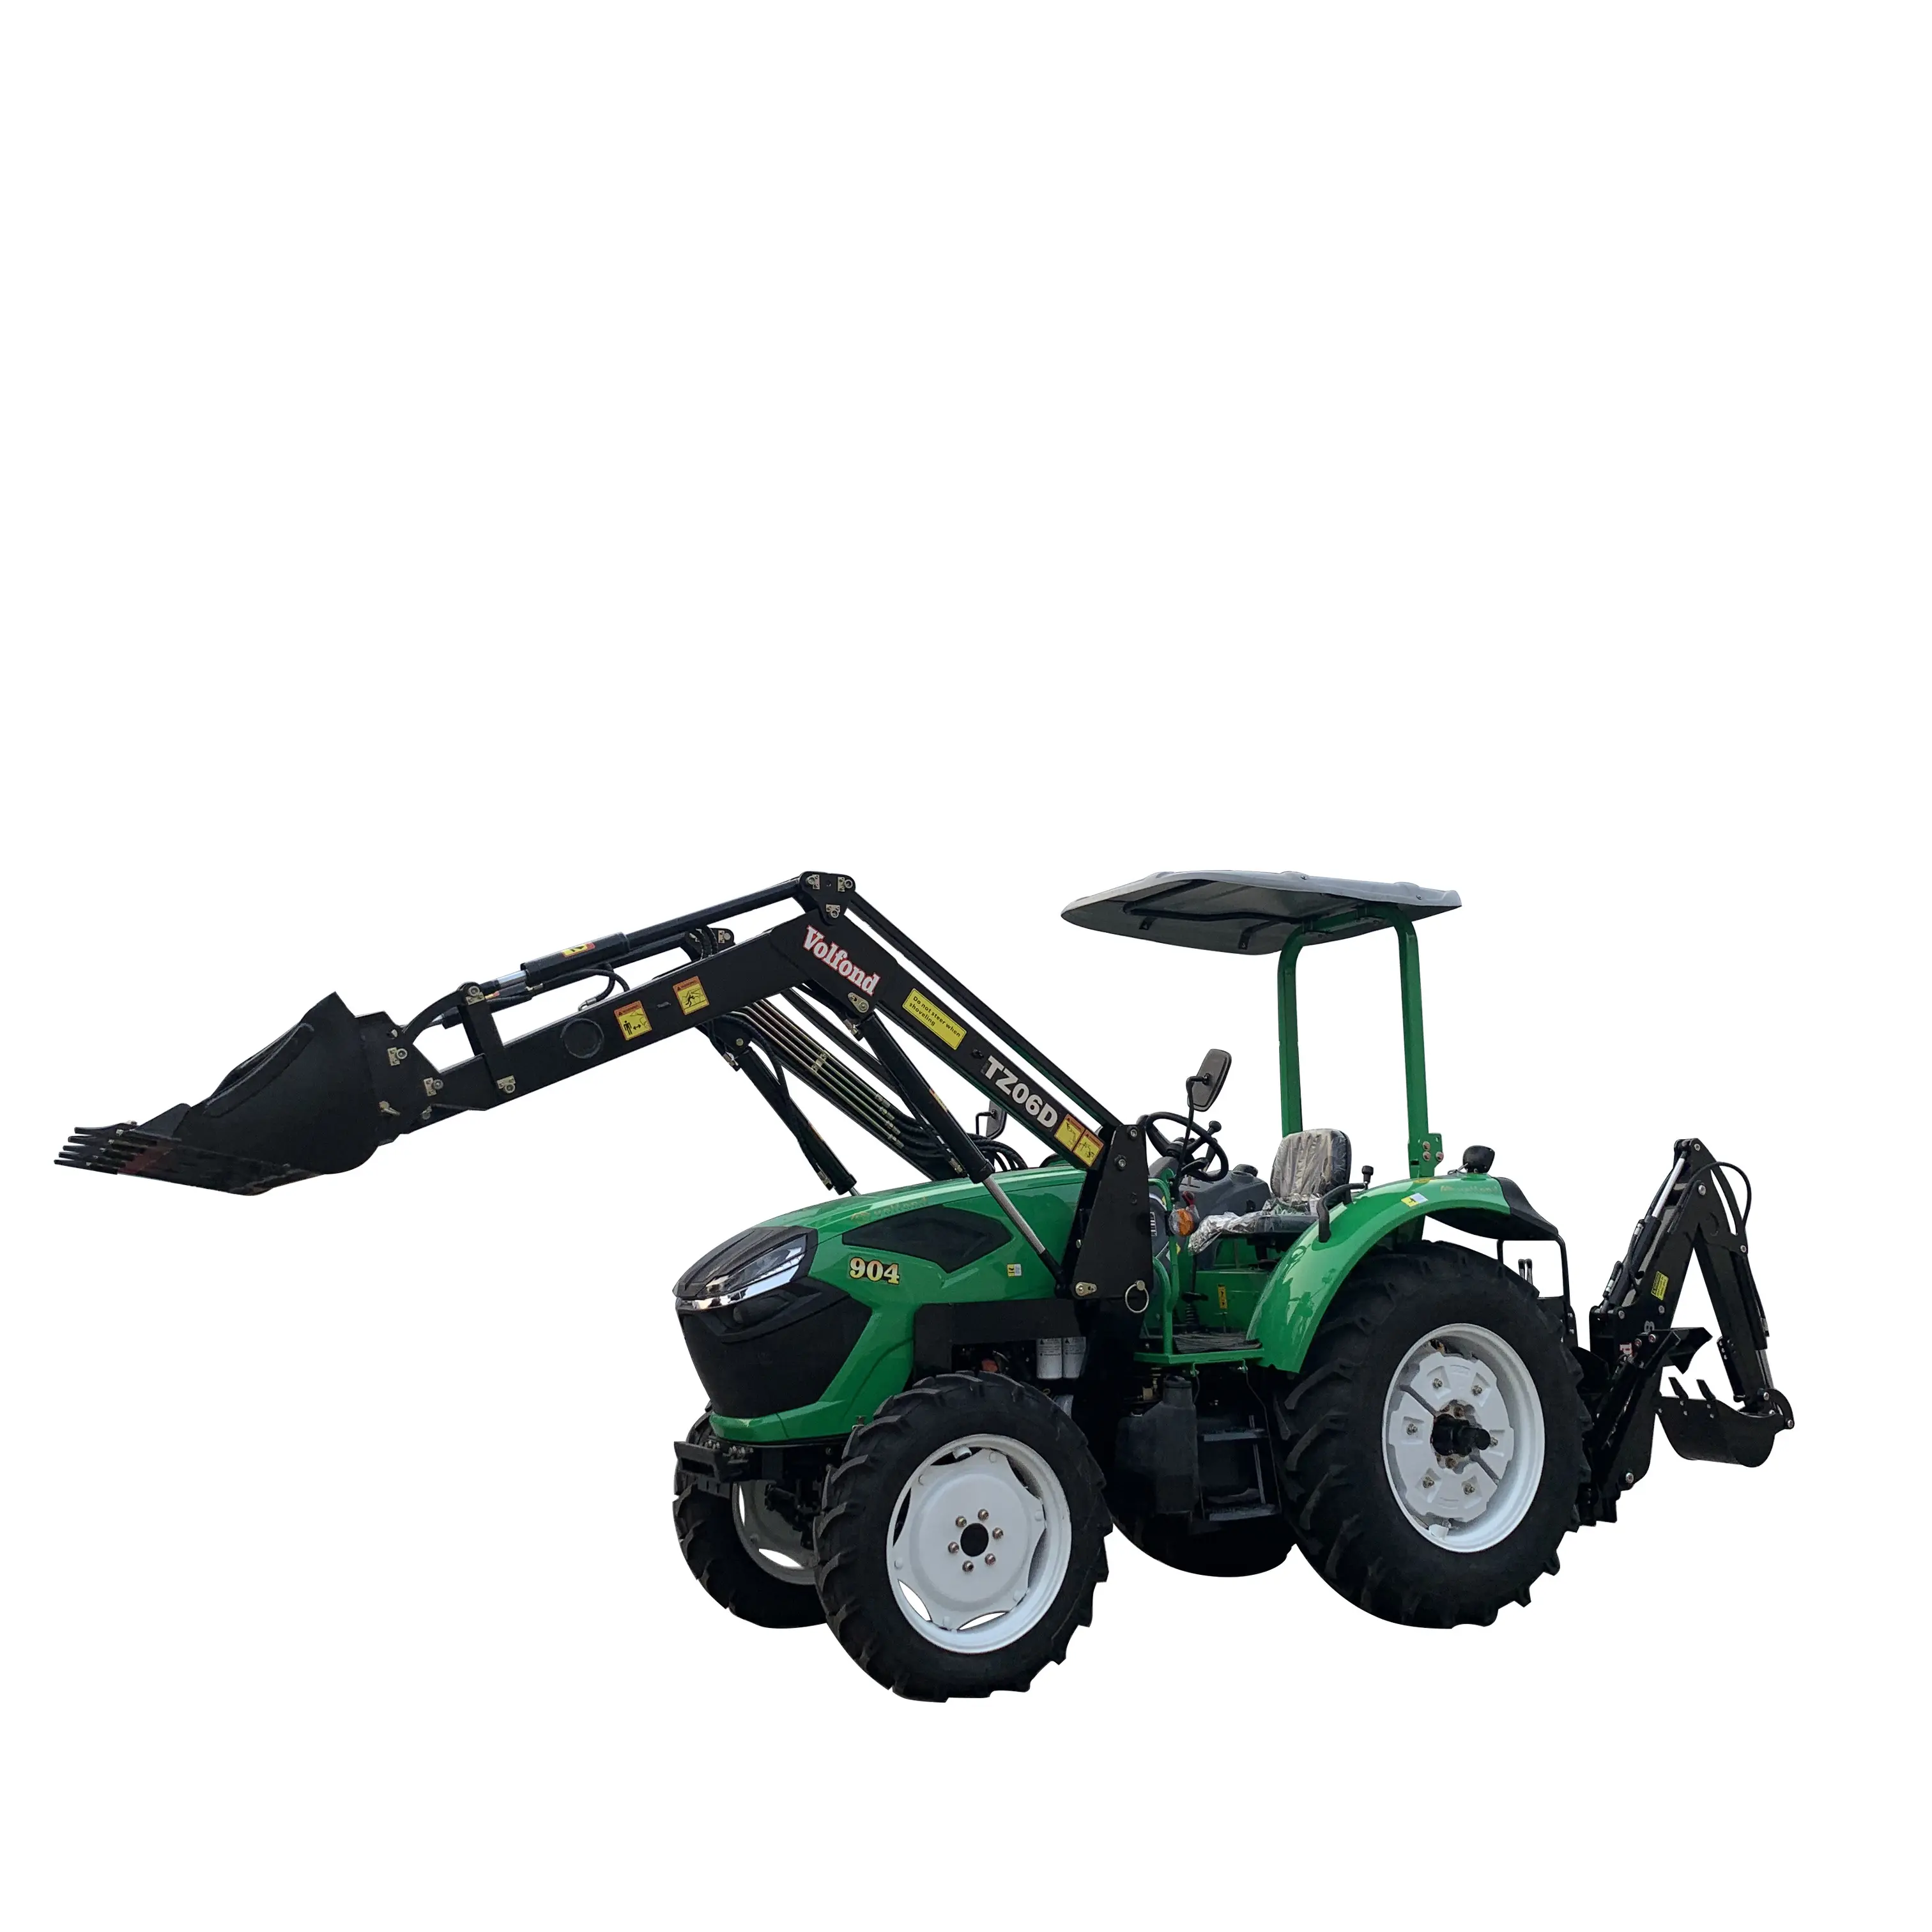 Sun-shade Farmer Use 4wd 4x4 Agricol 3-point Linkage With Front End Loader and Backhoe 90hp Farming Multifunctional Tractors